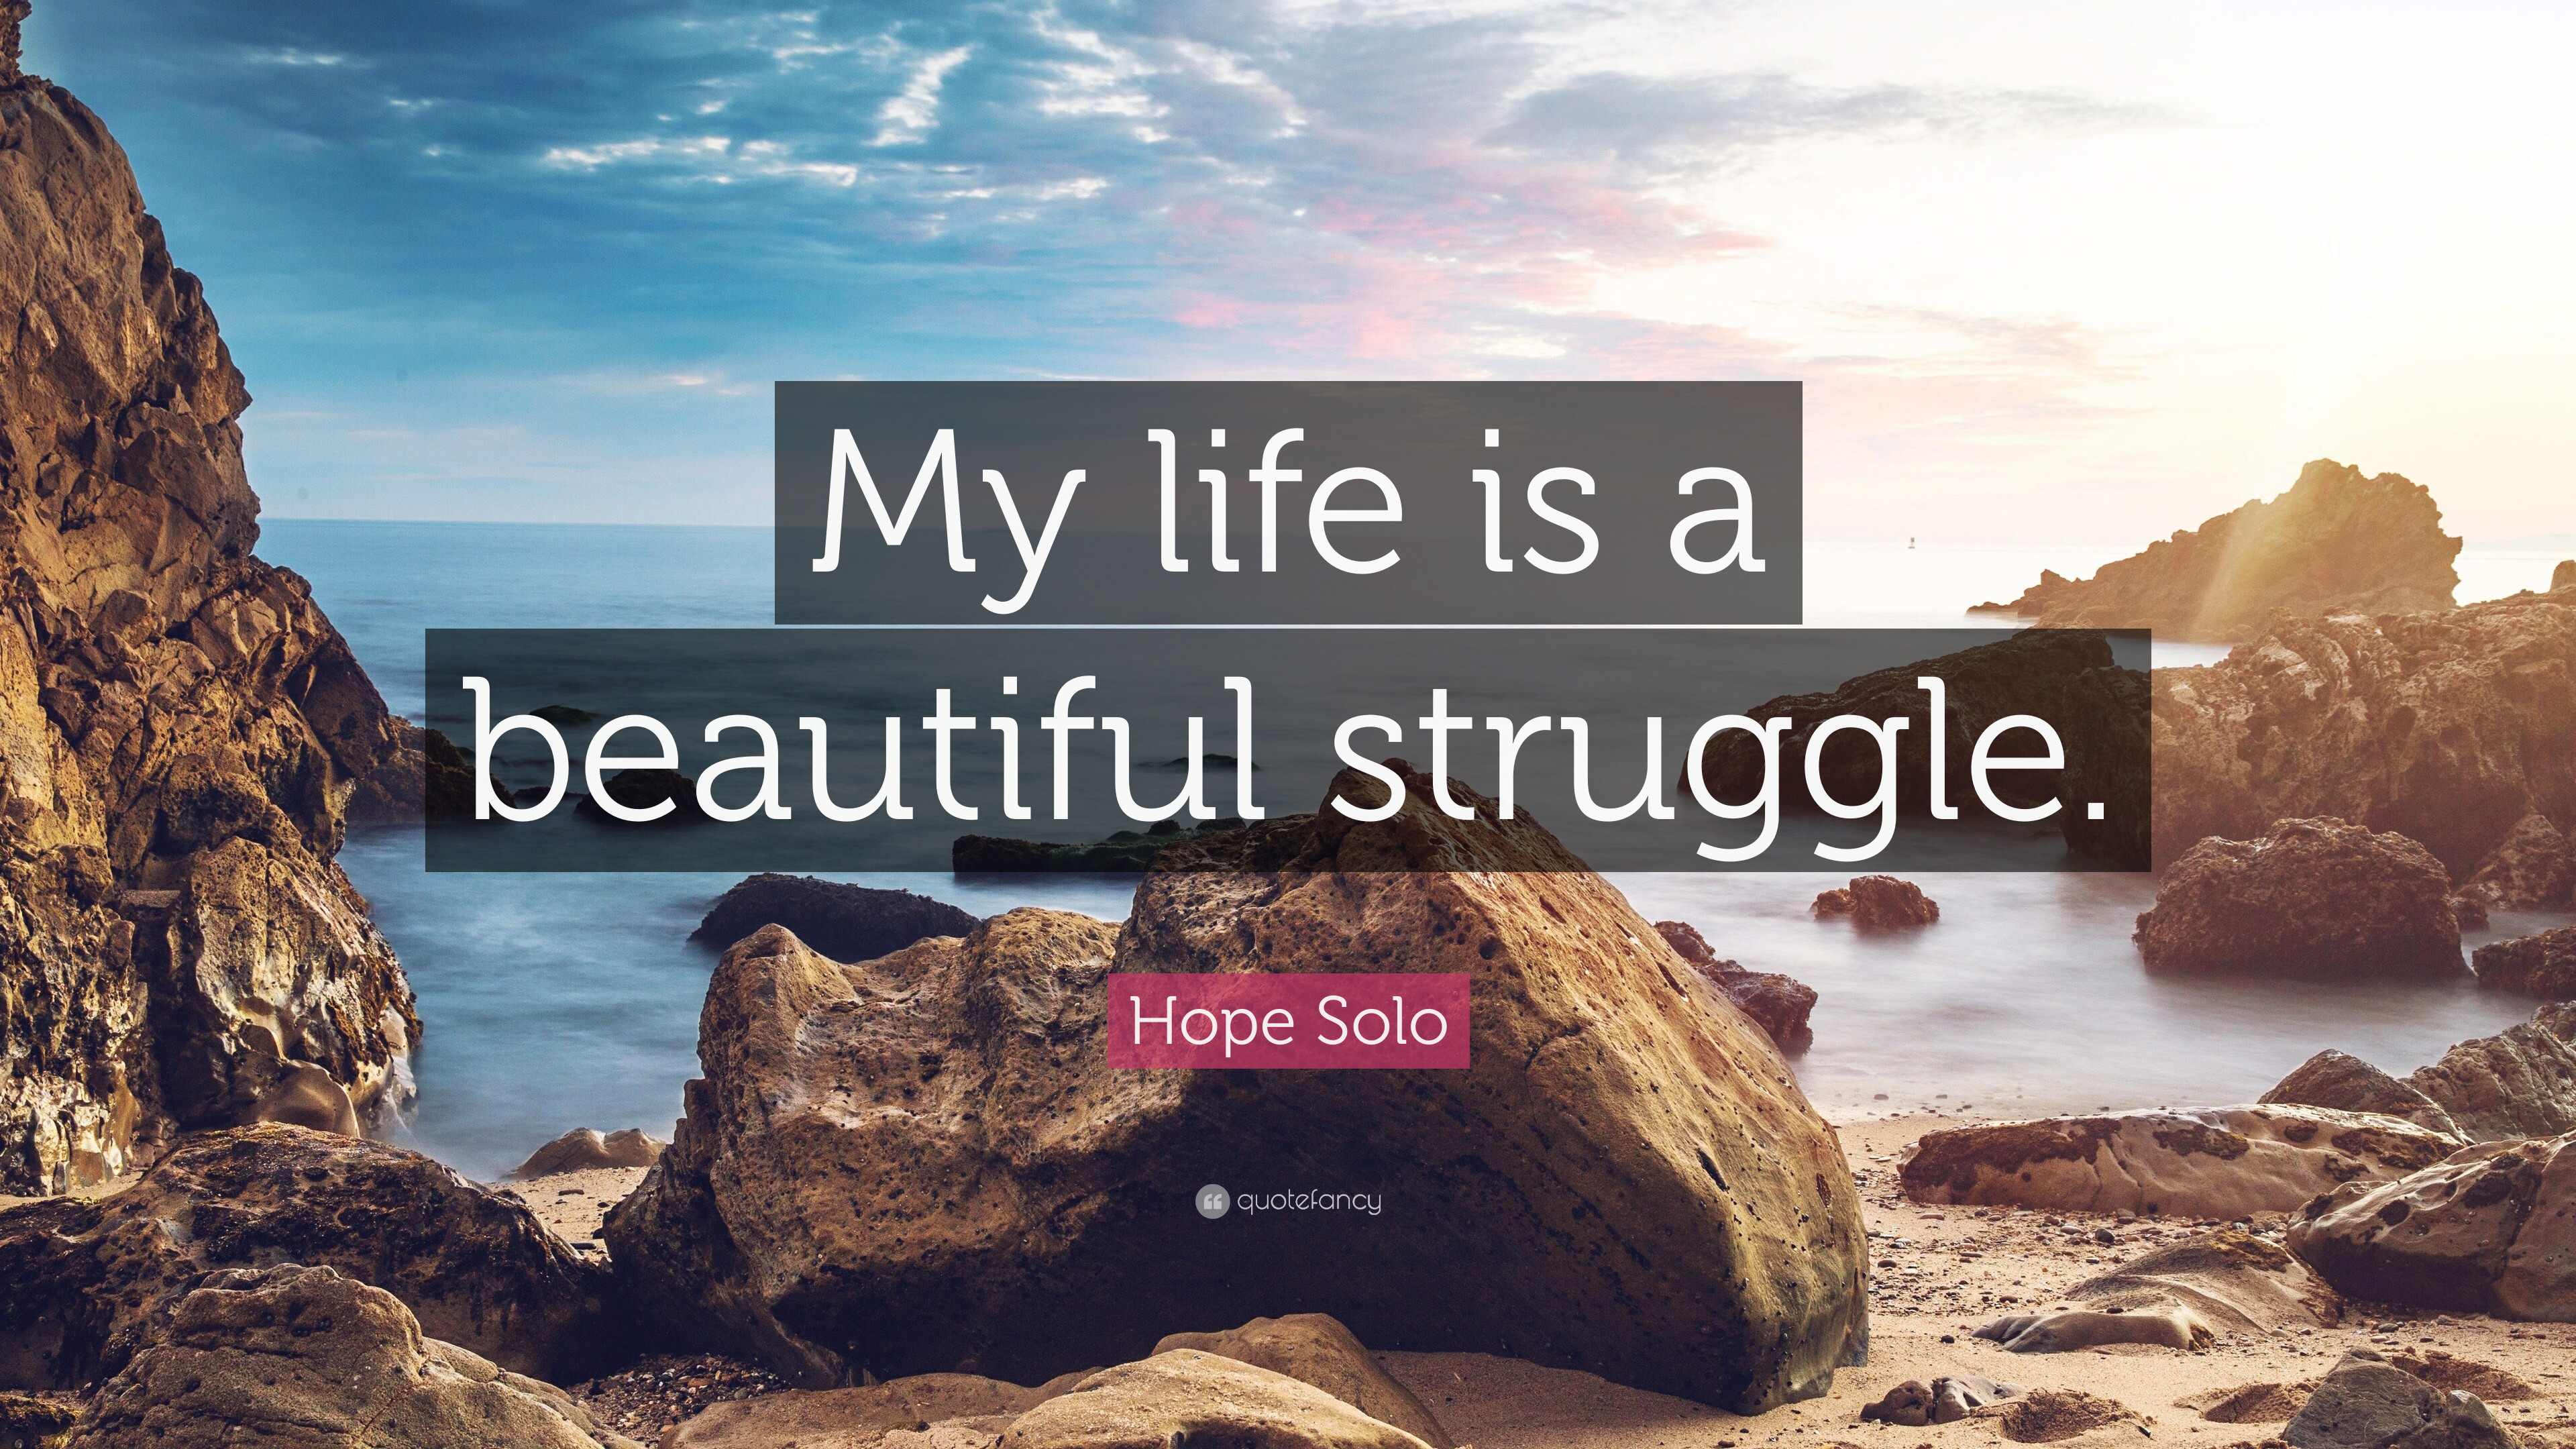 3840x2160 Hope Solo Quote: “My life is a beautiful struggle.”